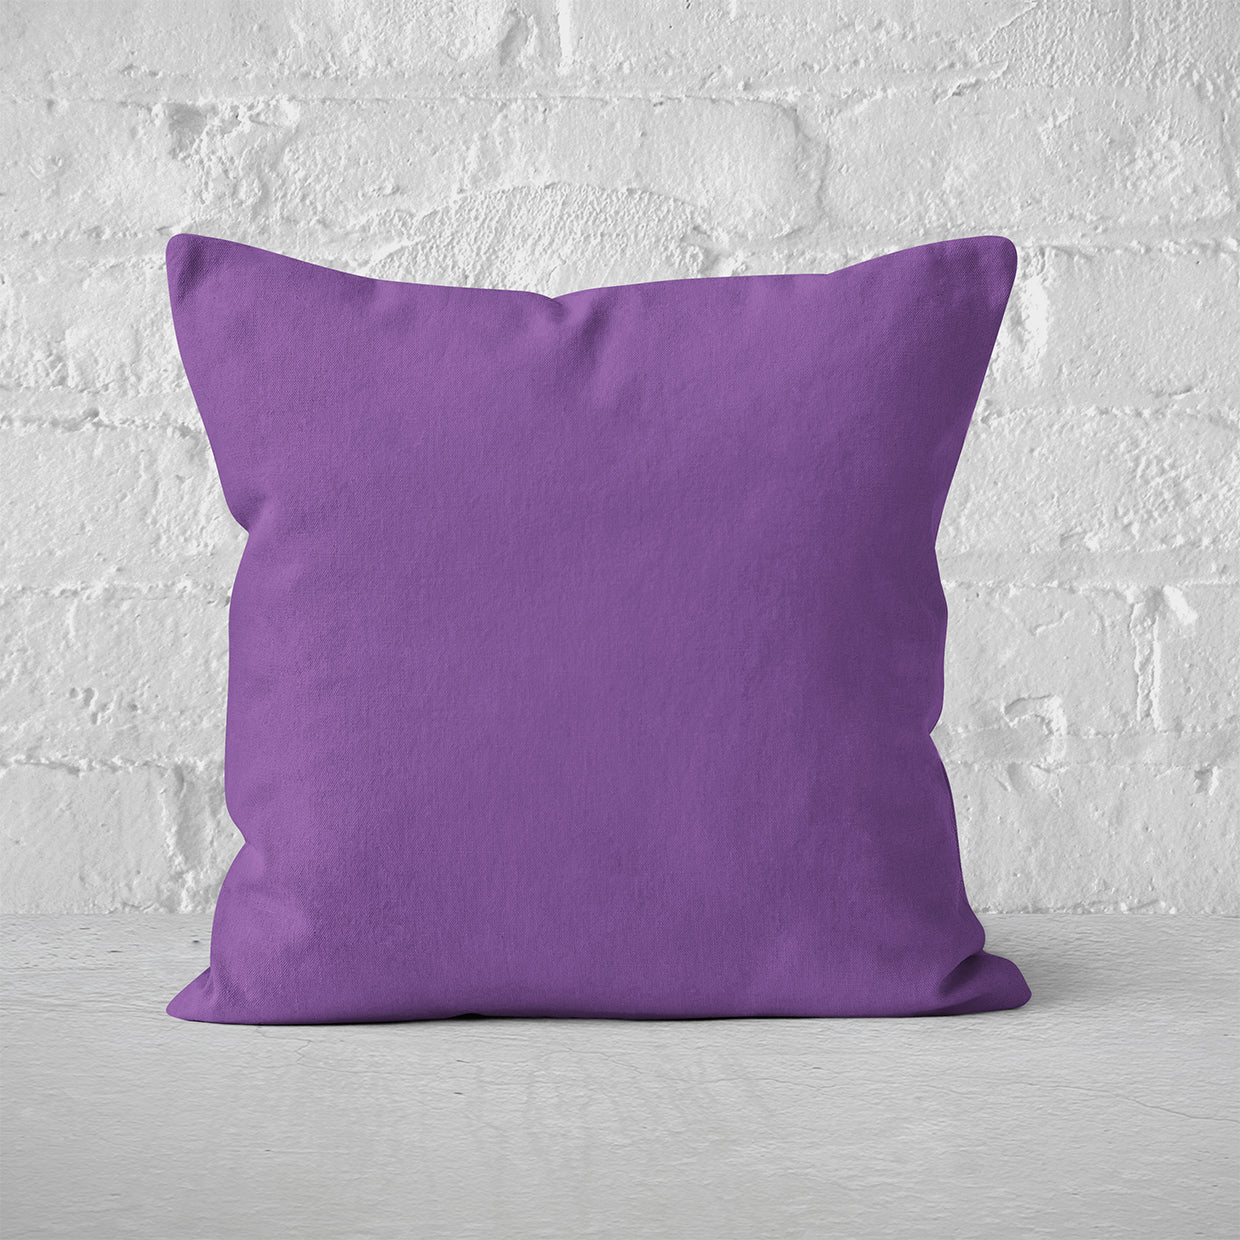 Pillow Cover Art Feature 'Solid' - Purple - Cotton Twill